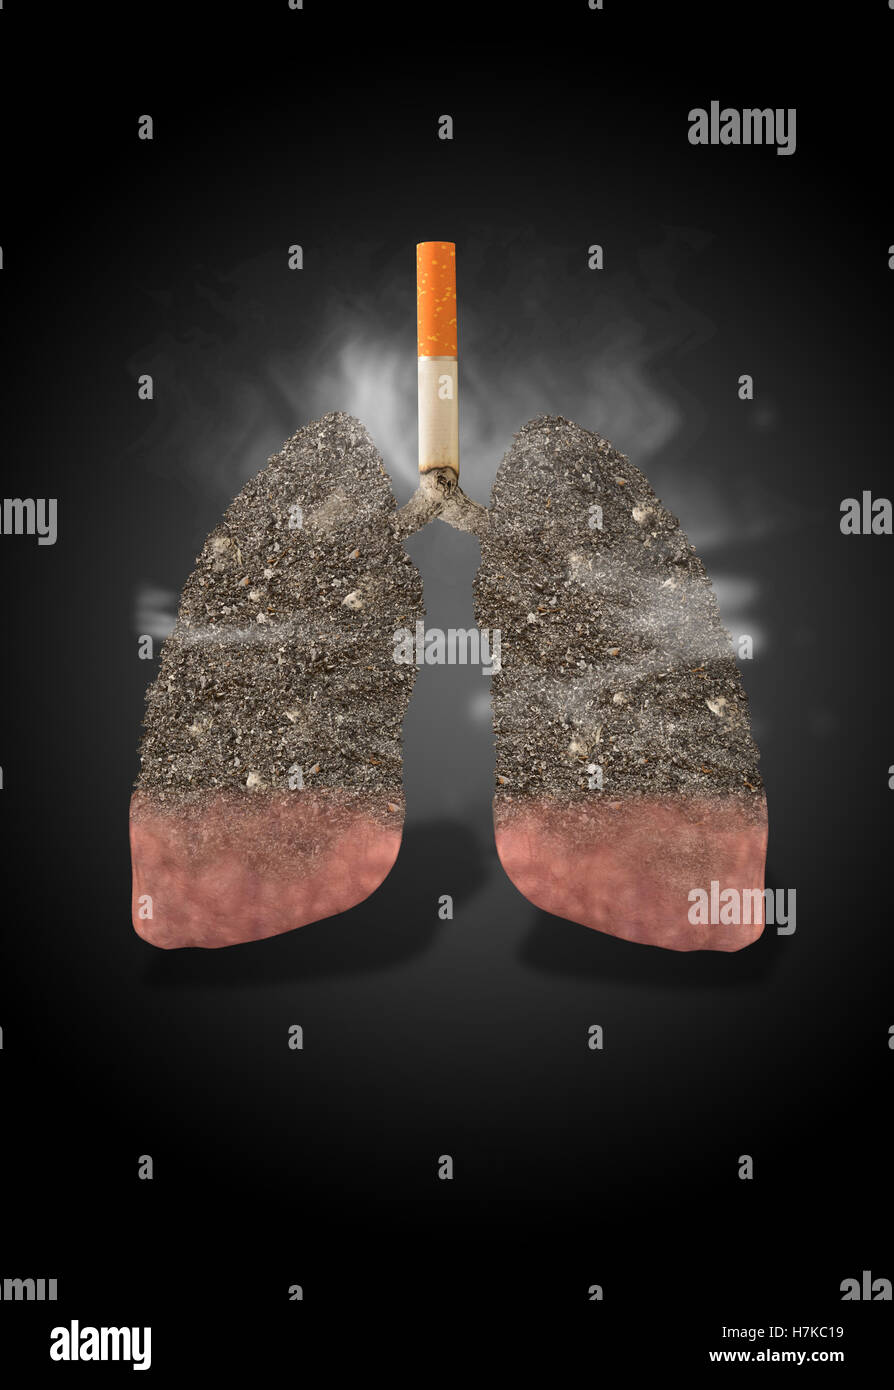 Cigarette, lungs full of ash, concept Stock Photo